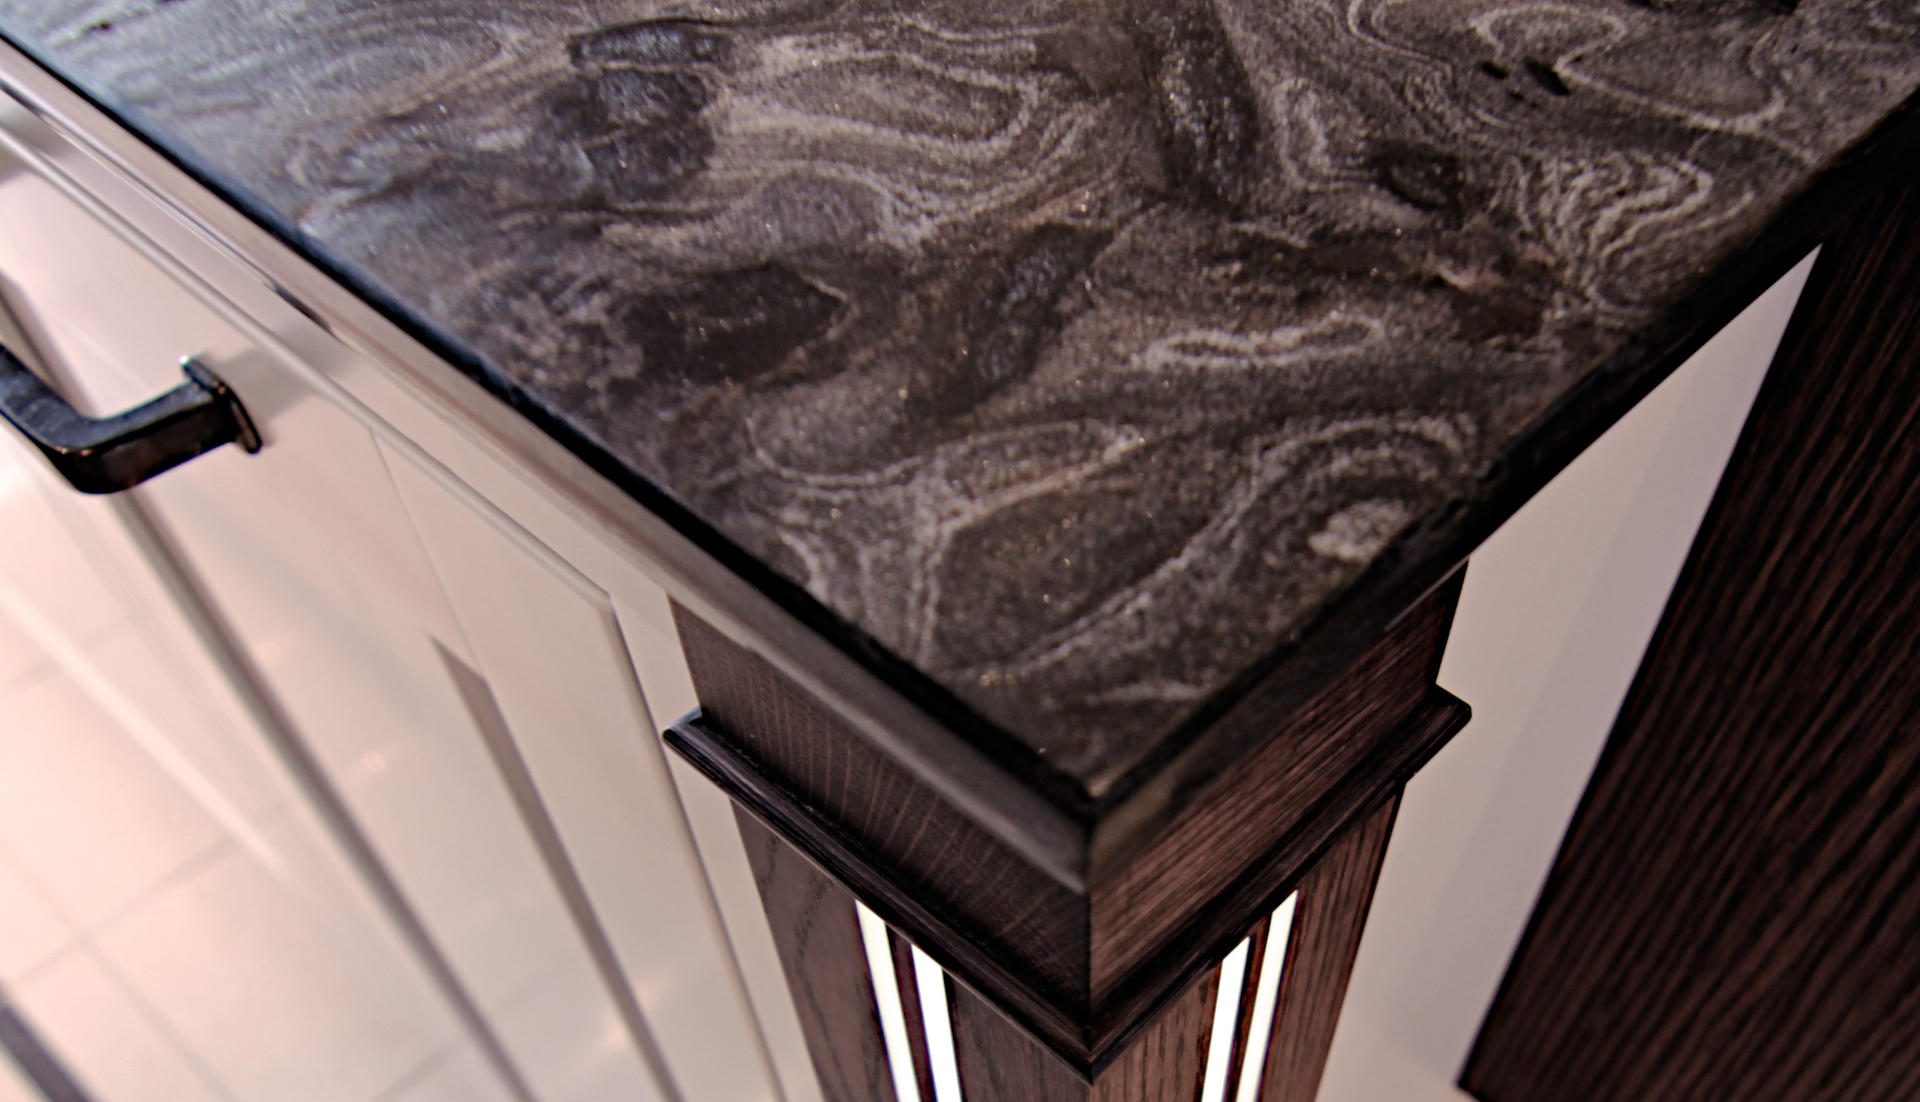 Natural Stone Work Surfaces